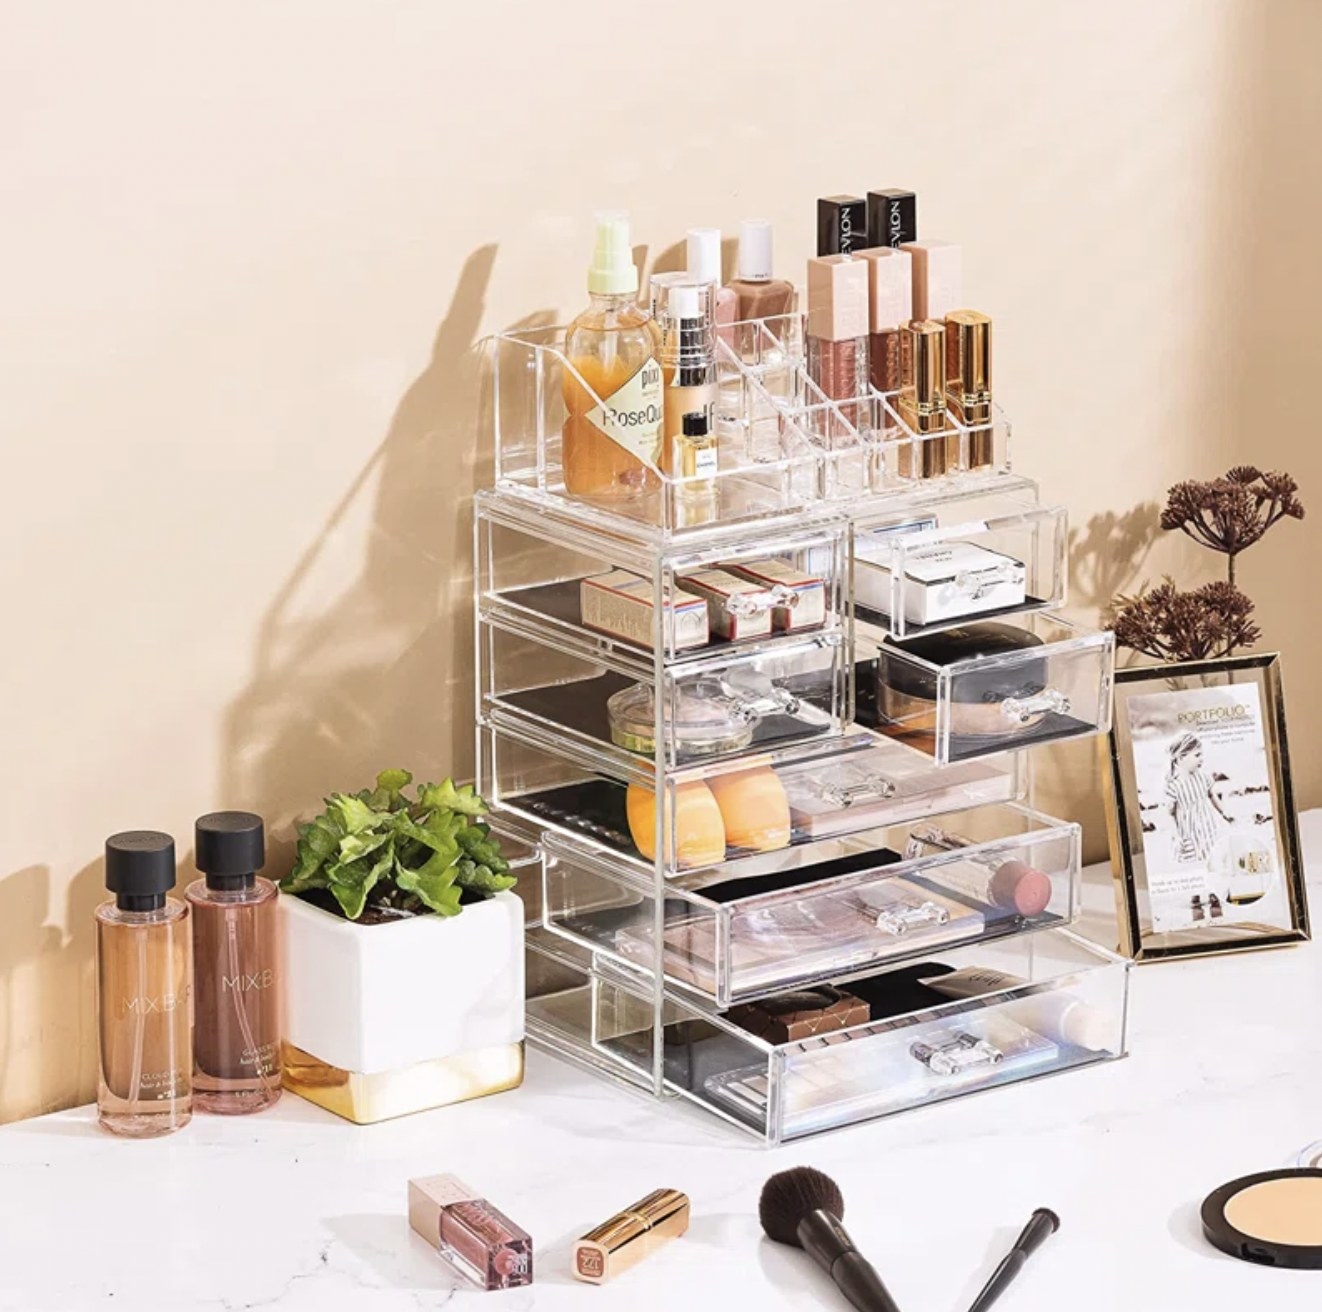 the clear makeup organizer with cosmetics inside